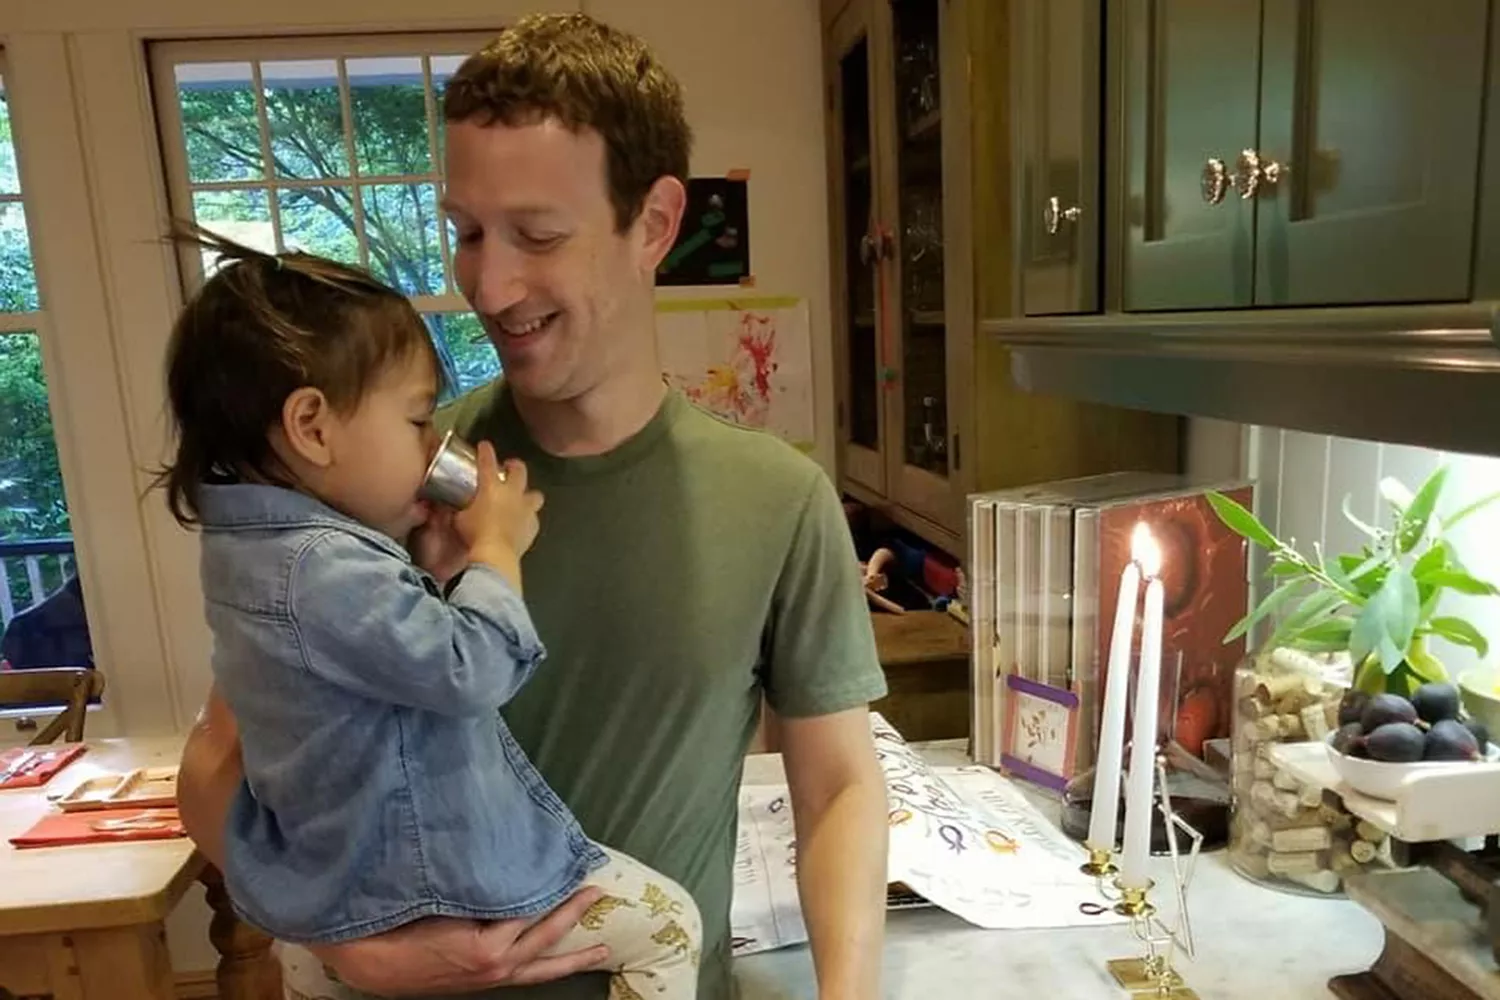 Mark Zuckerberg, Yours Truly, People, September 26, 2023